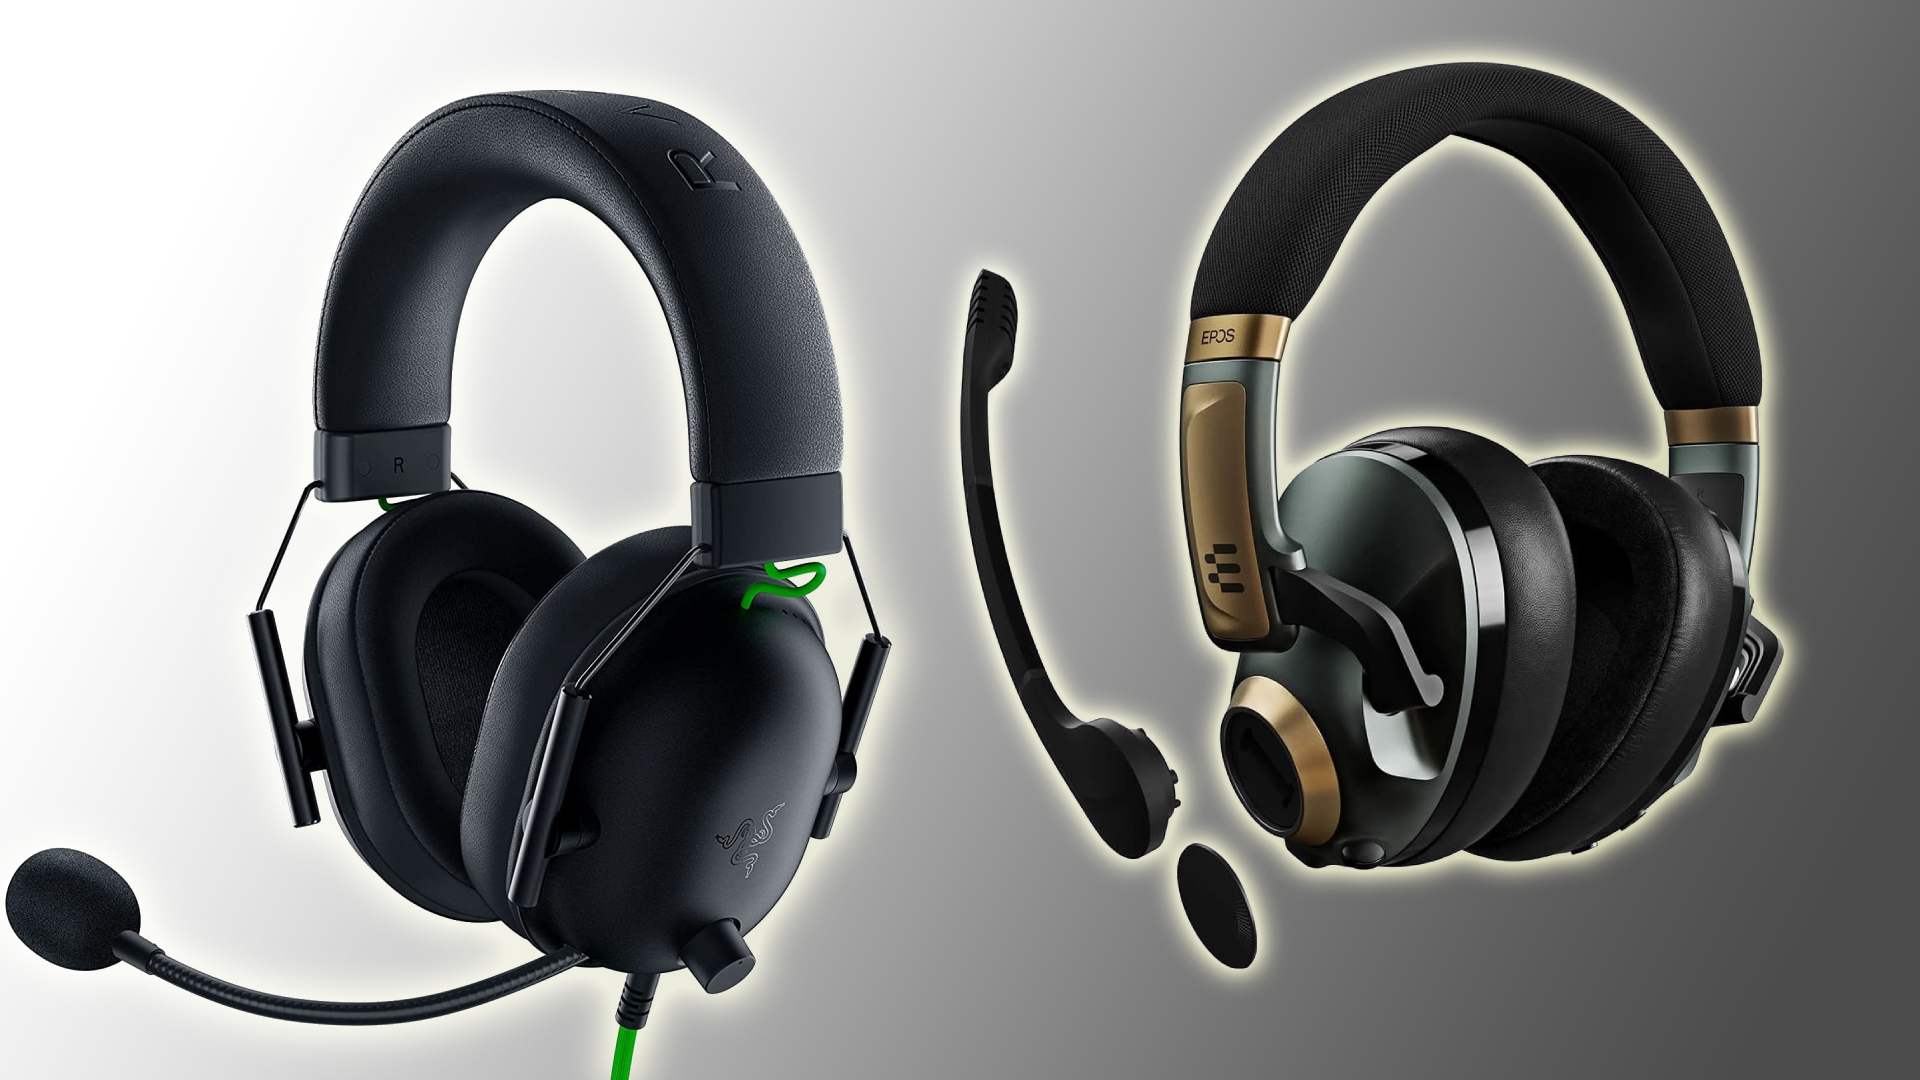 EPOS treats Xbox gamers with two new wired headsets